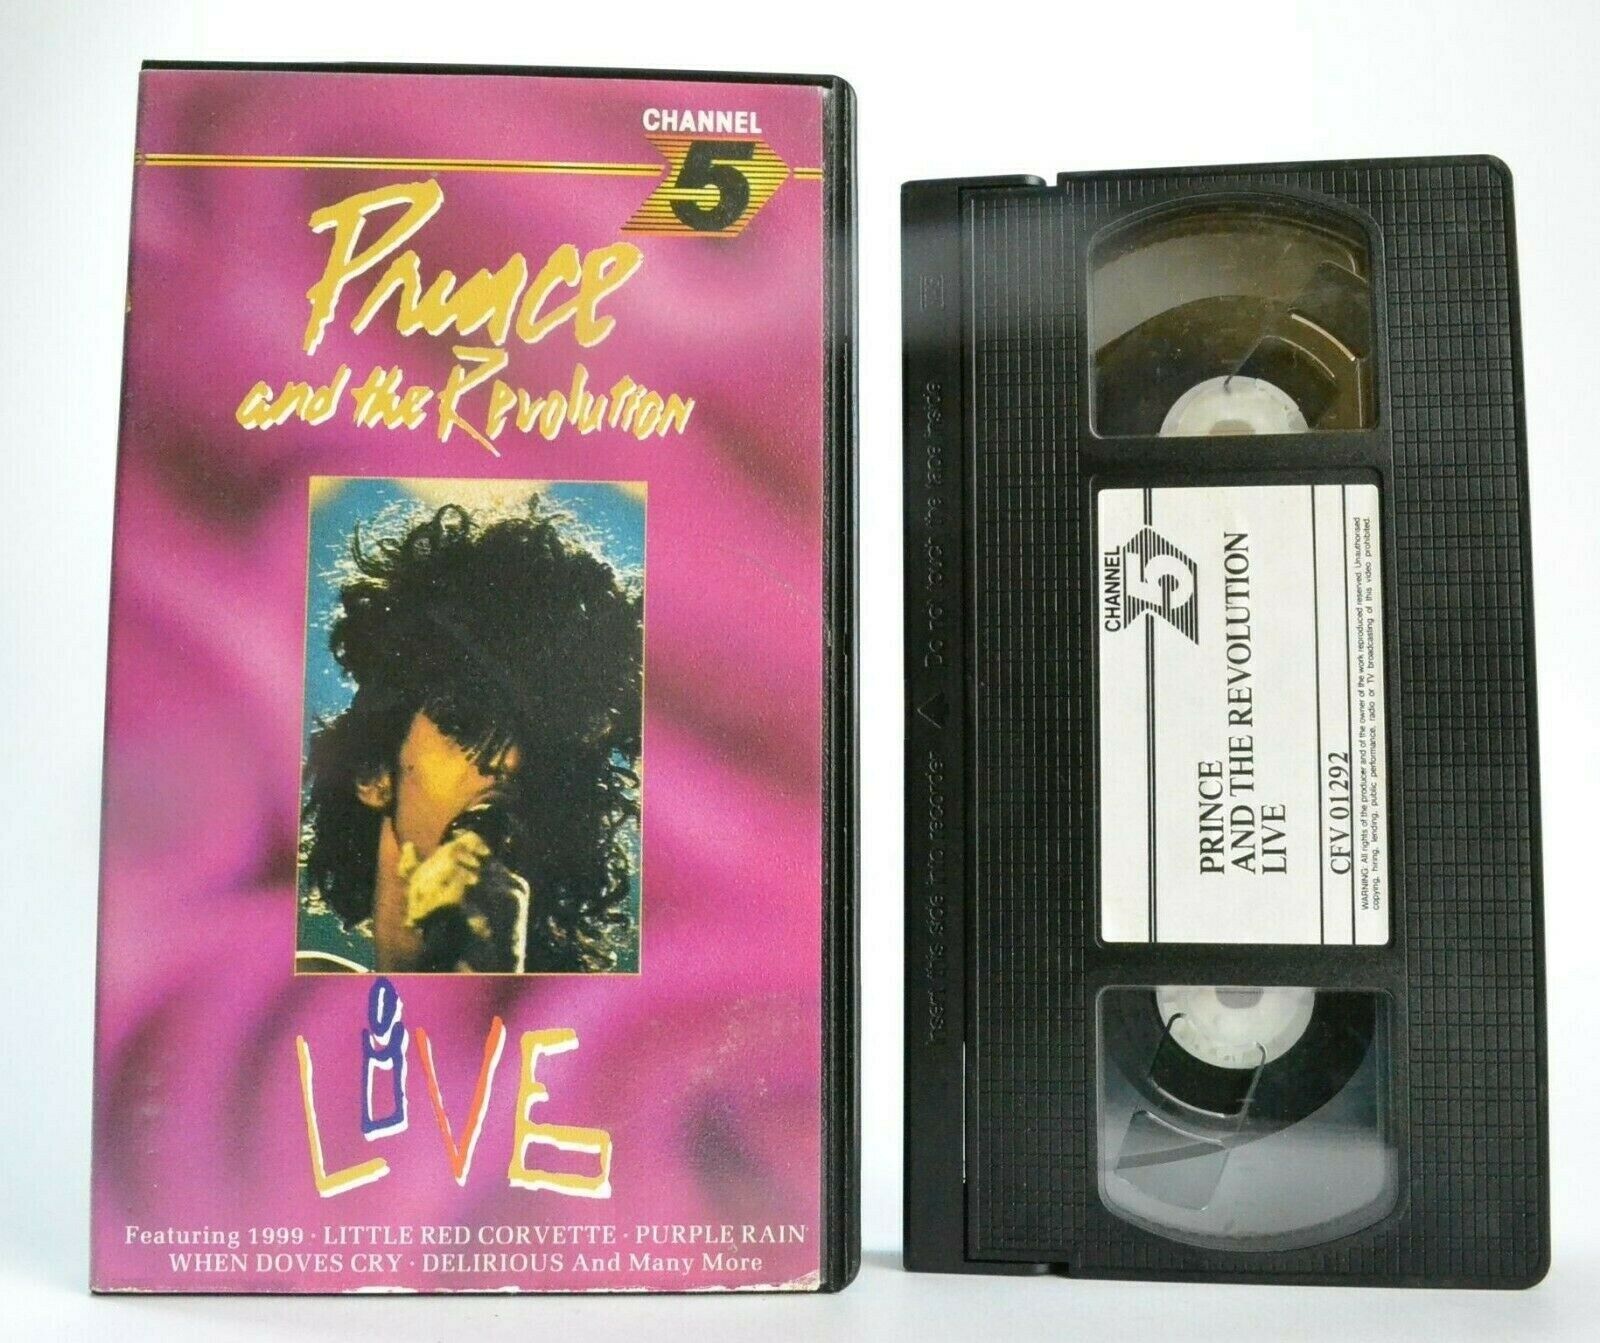 Prince And The Revolution: Live - (1985) USA Concert - Music Performance - VHS-